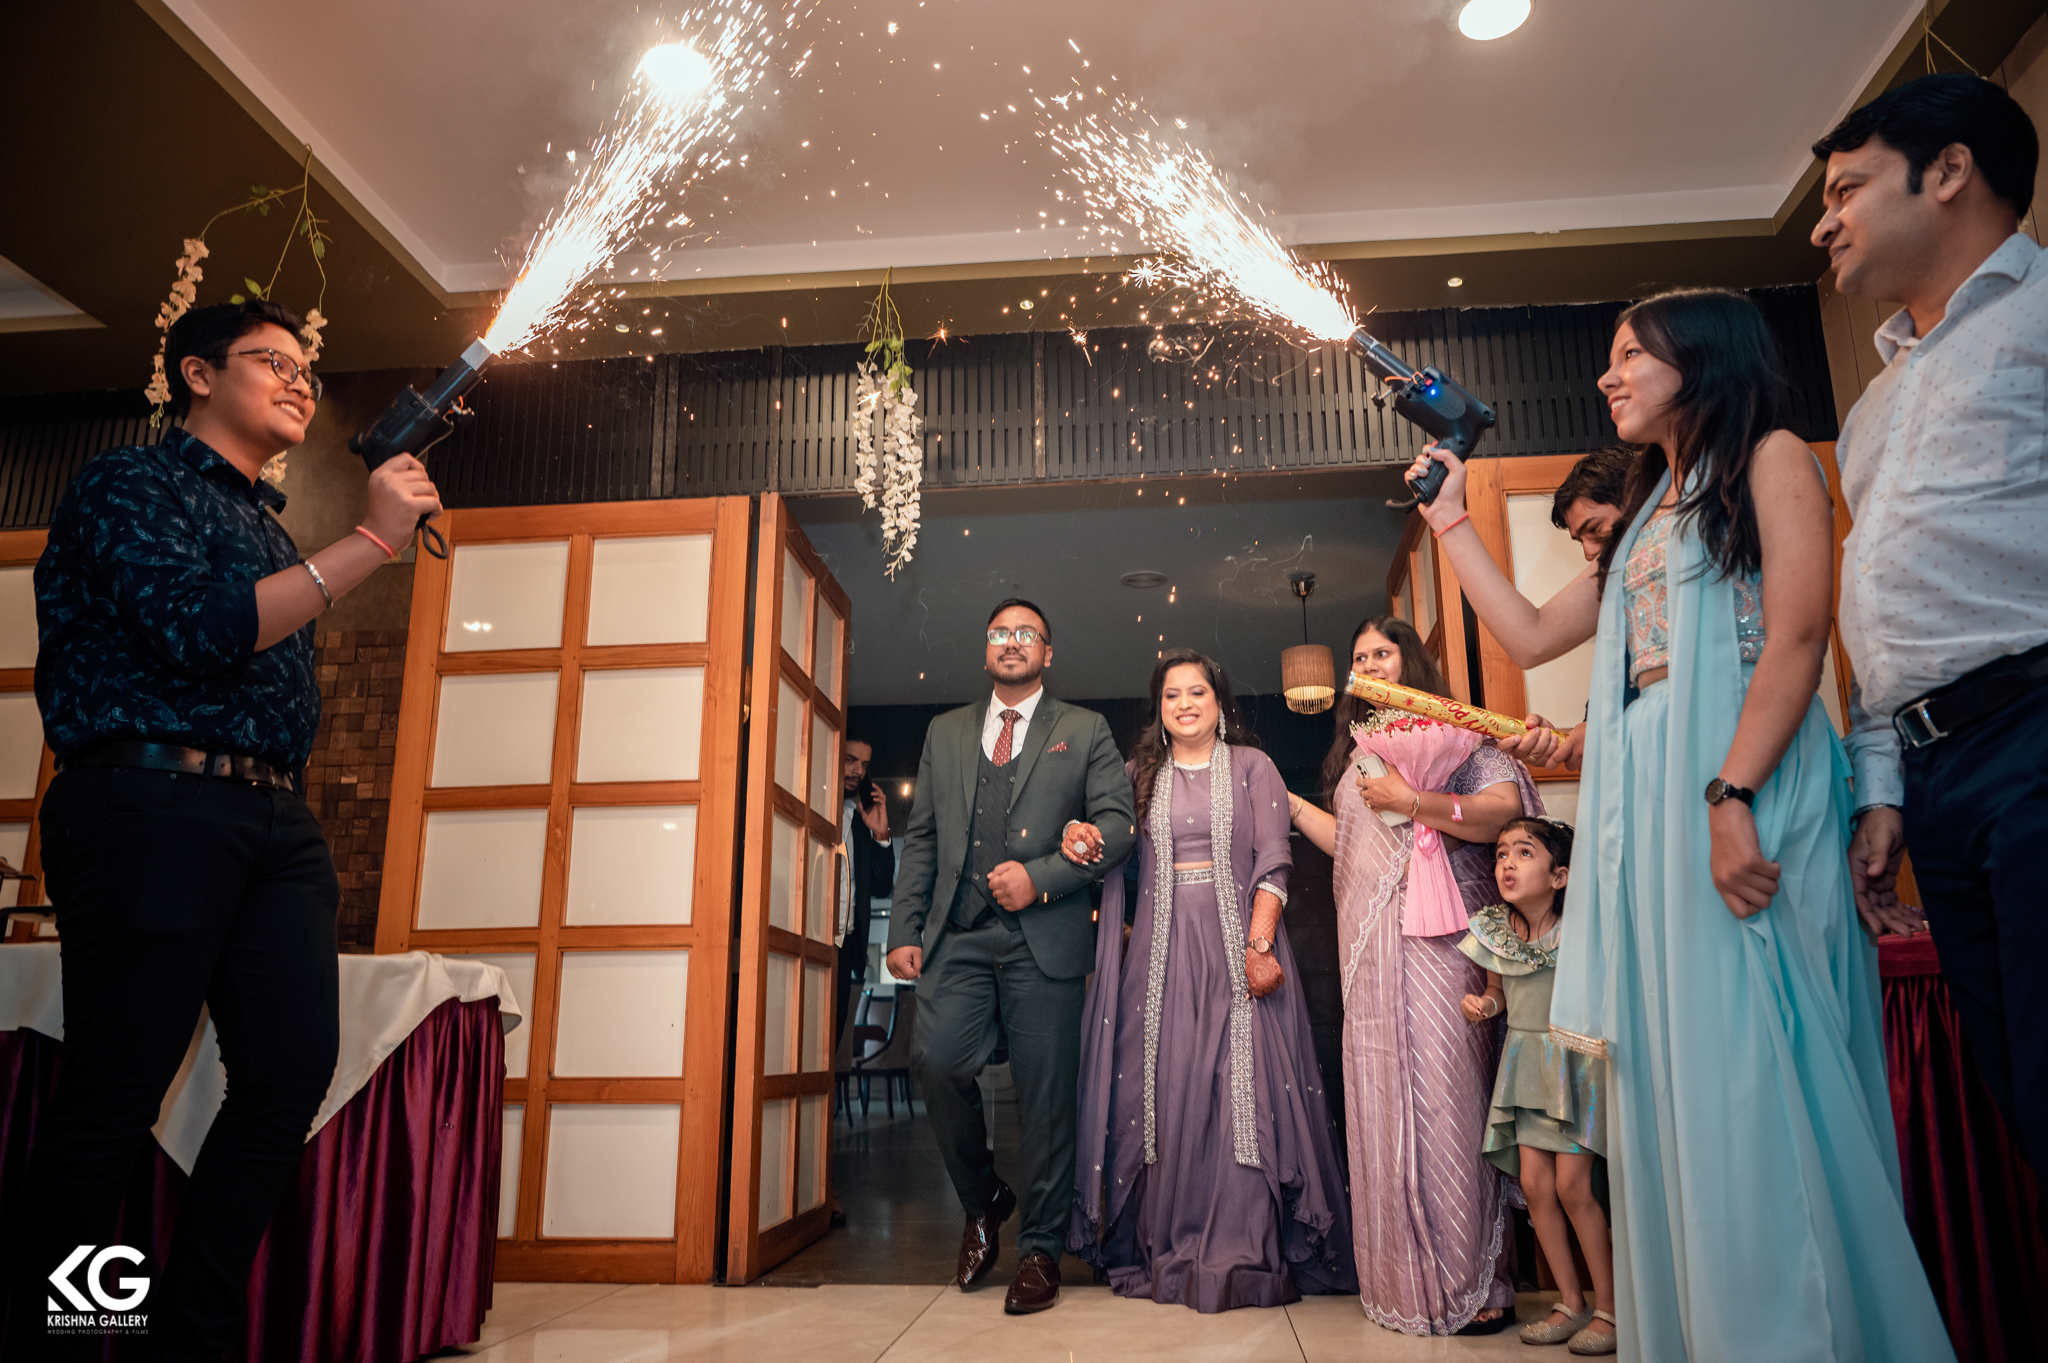 Most Enchanting Engagement,Best Engagement Photography In Siliguri, Ring Ceremony, Engagement Photography in Hotel Udaan, Vishal and Khushi,Best Ideas For Engagement Photography,Krishna Gallery Wedding Photography.